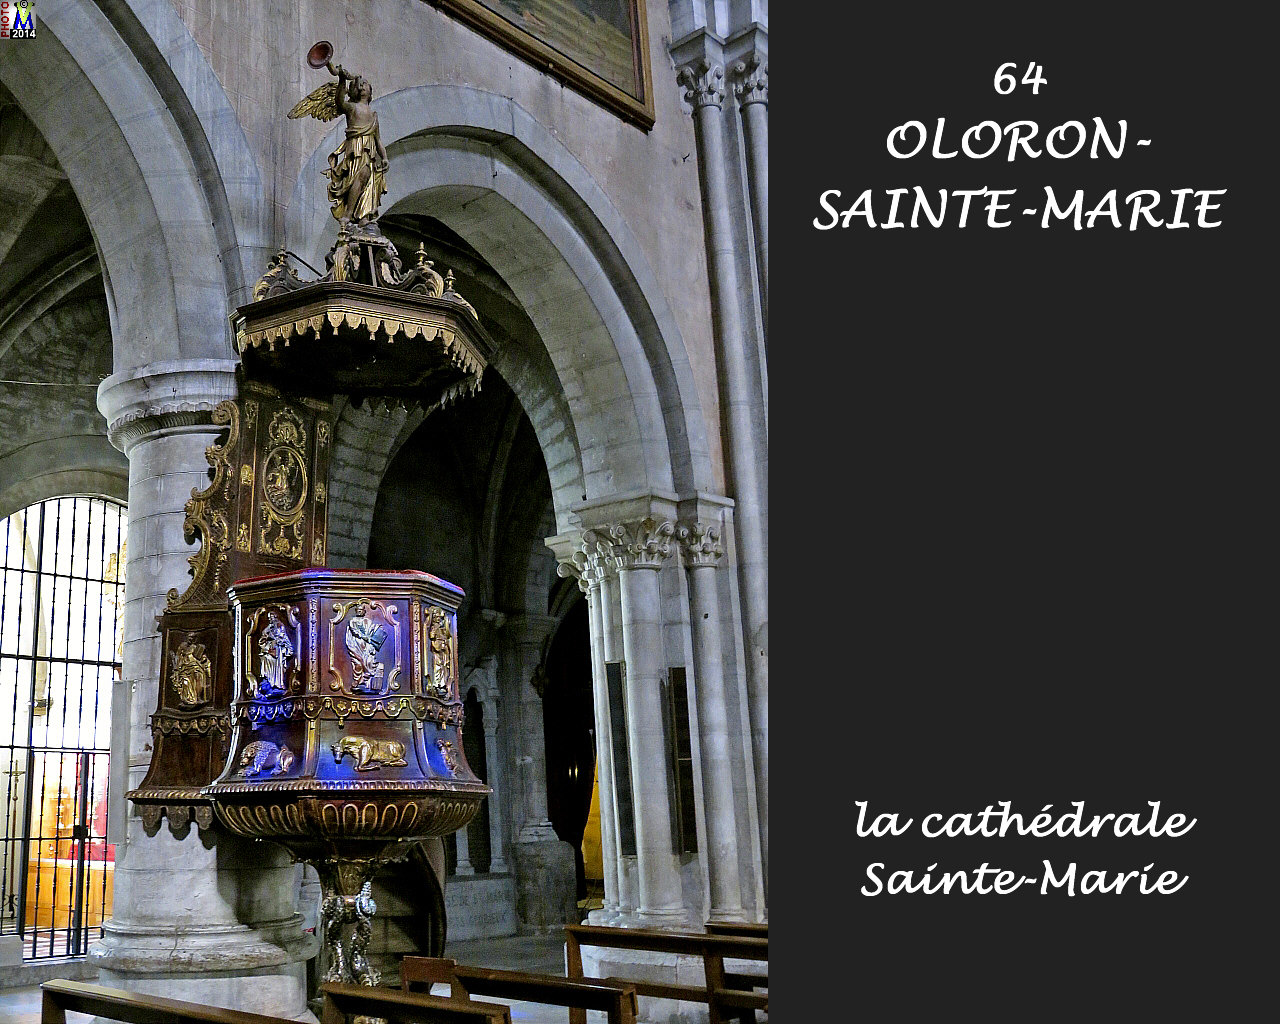 64OLORON-STE-MARIE_cathedrale_246.jpg